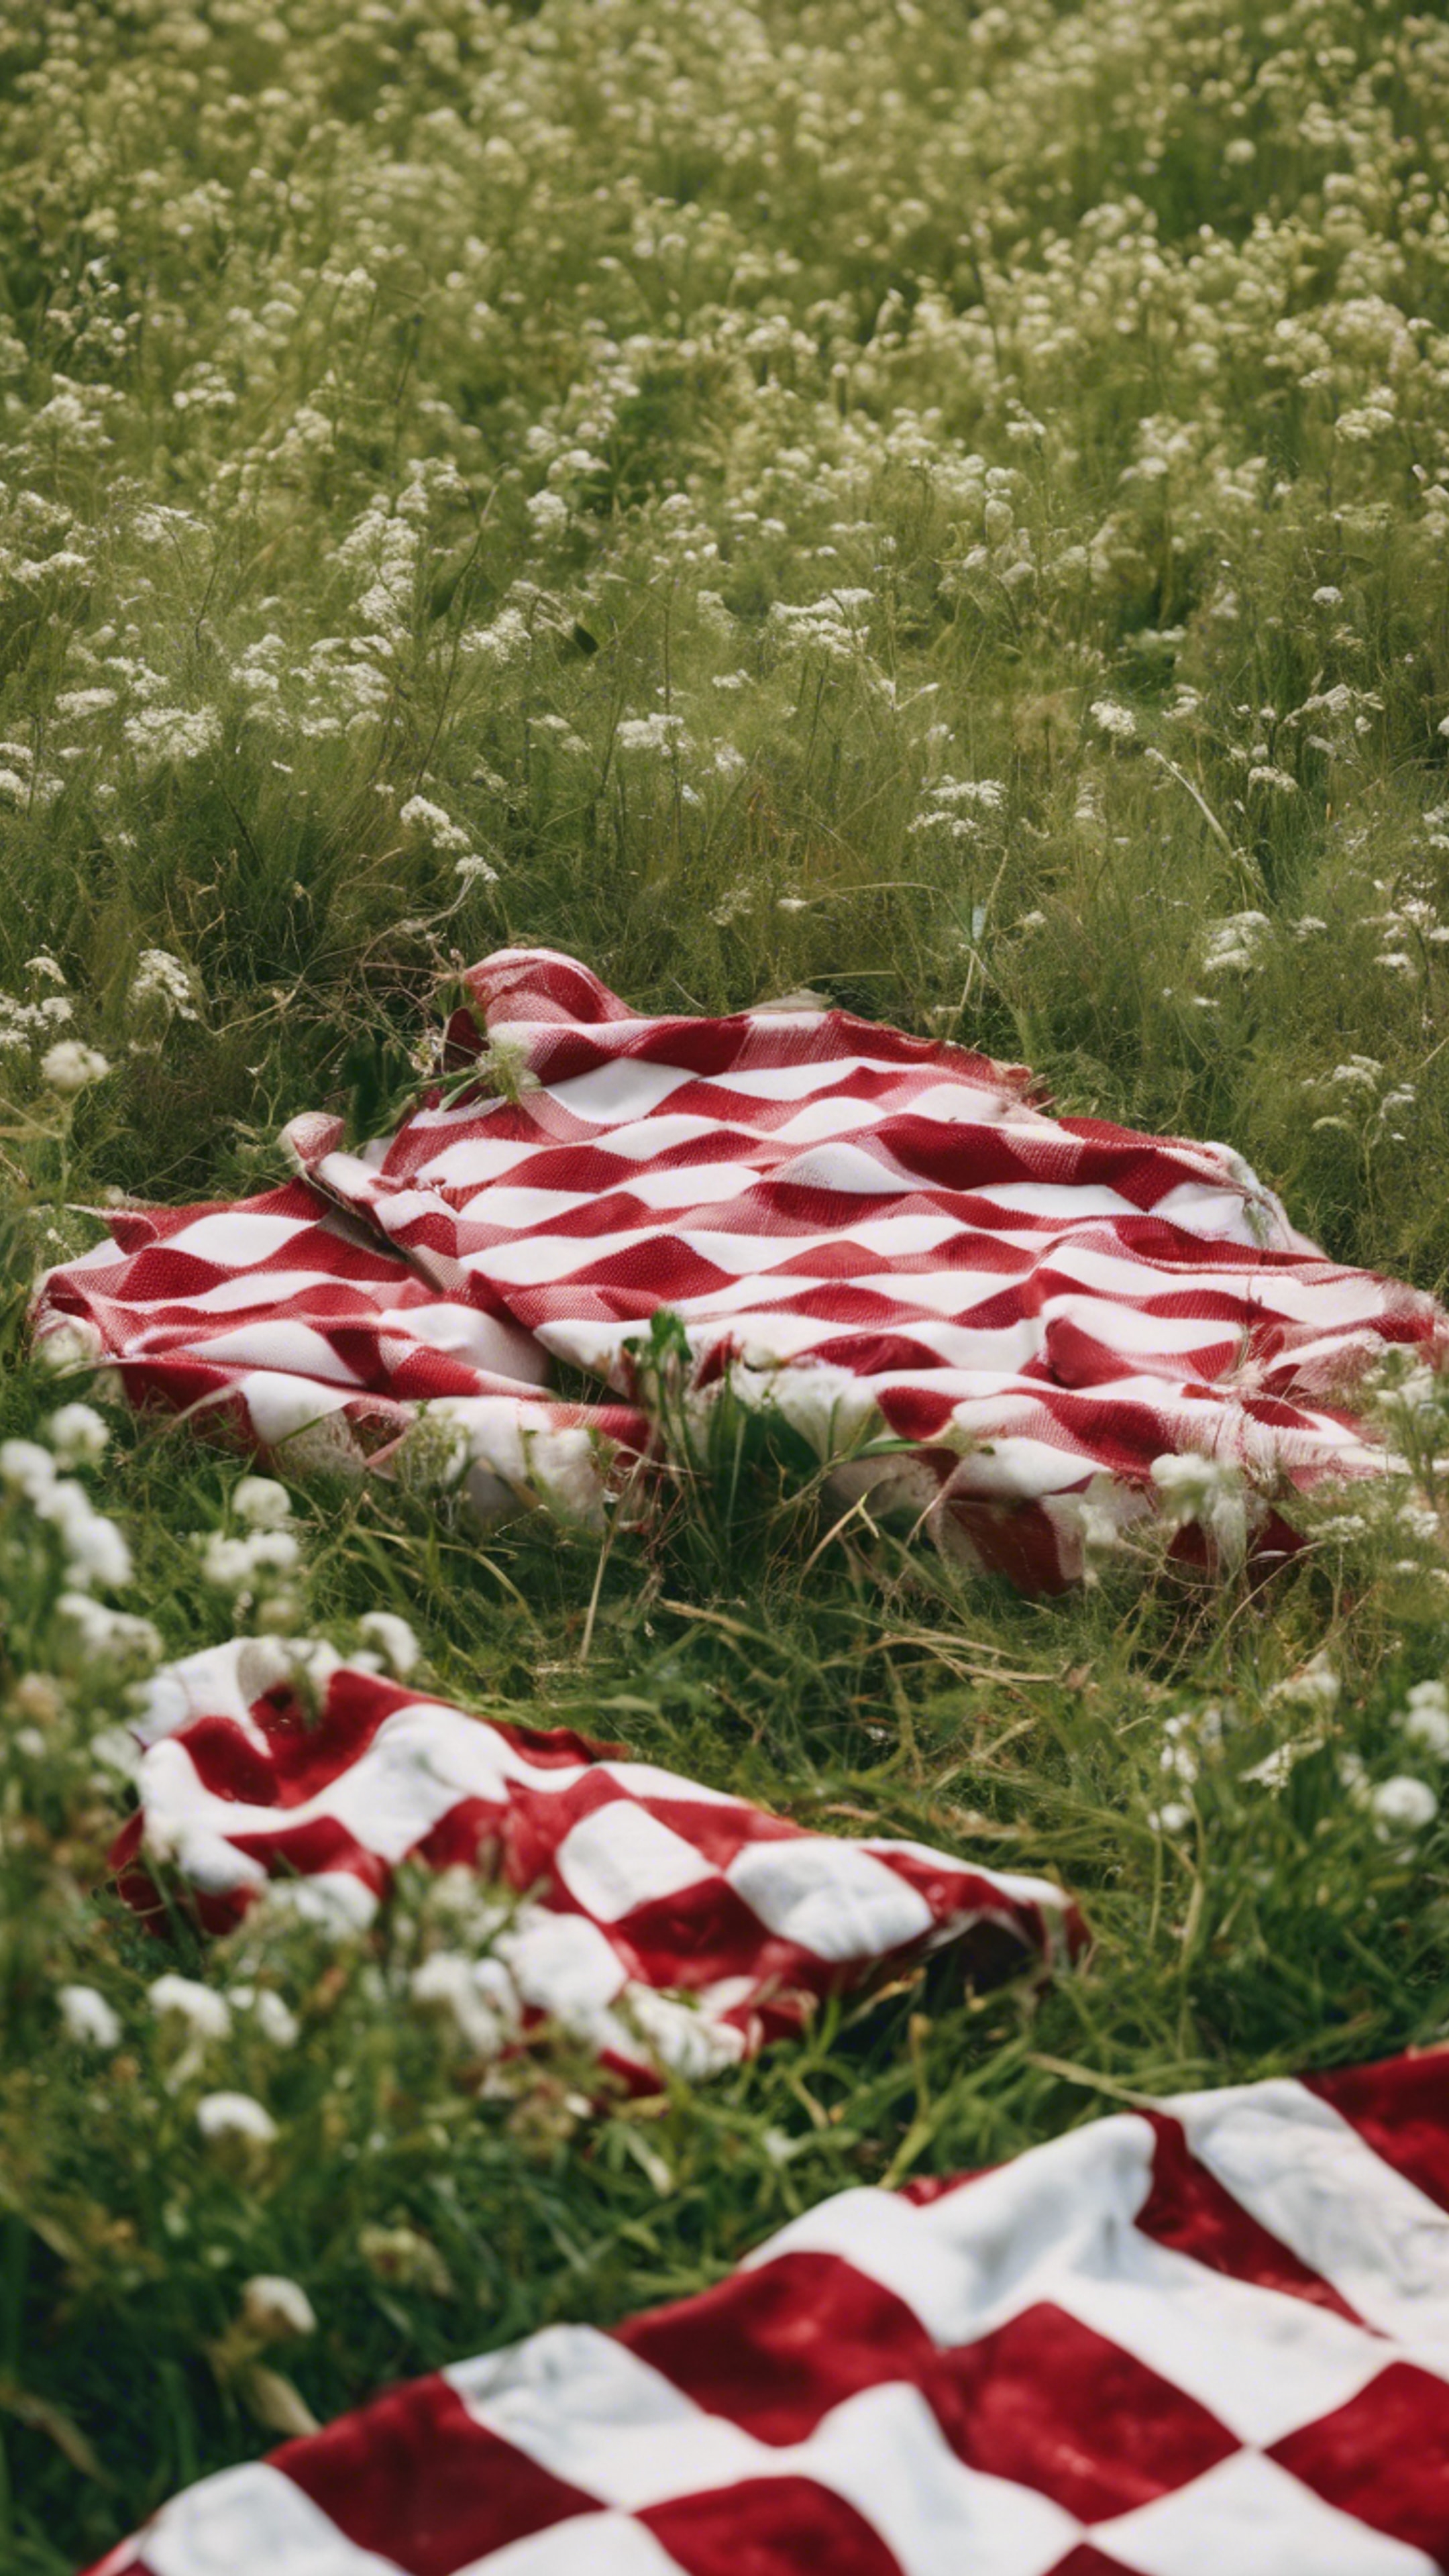 A red and white checkered picnic blanket spread out in a lush green field. Hintergrund[d3f97e971ed8445aa31d]